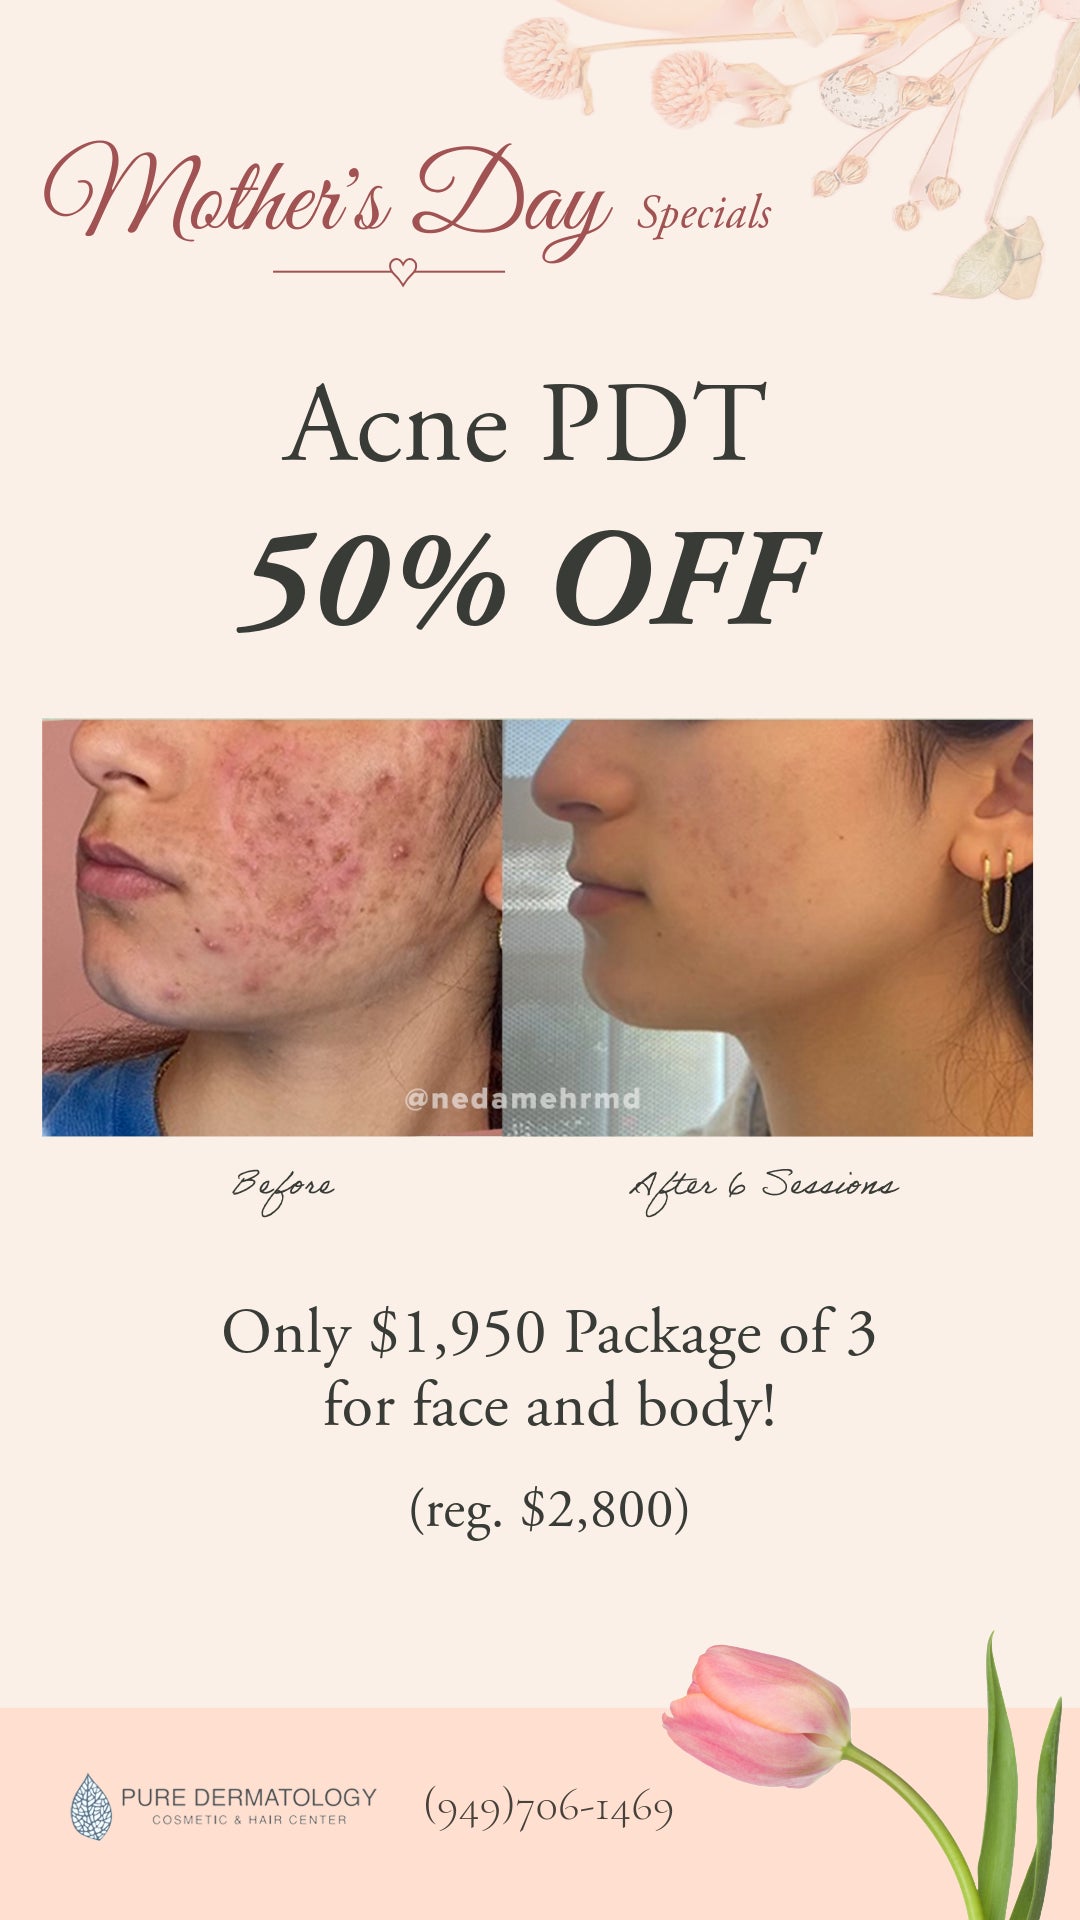 Acne PDT - 50% OFF